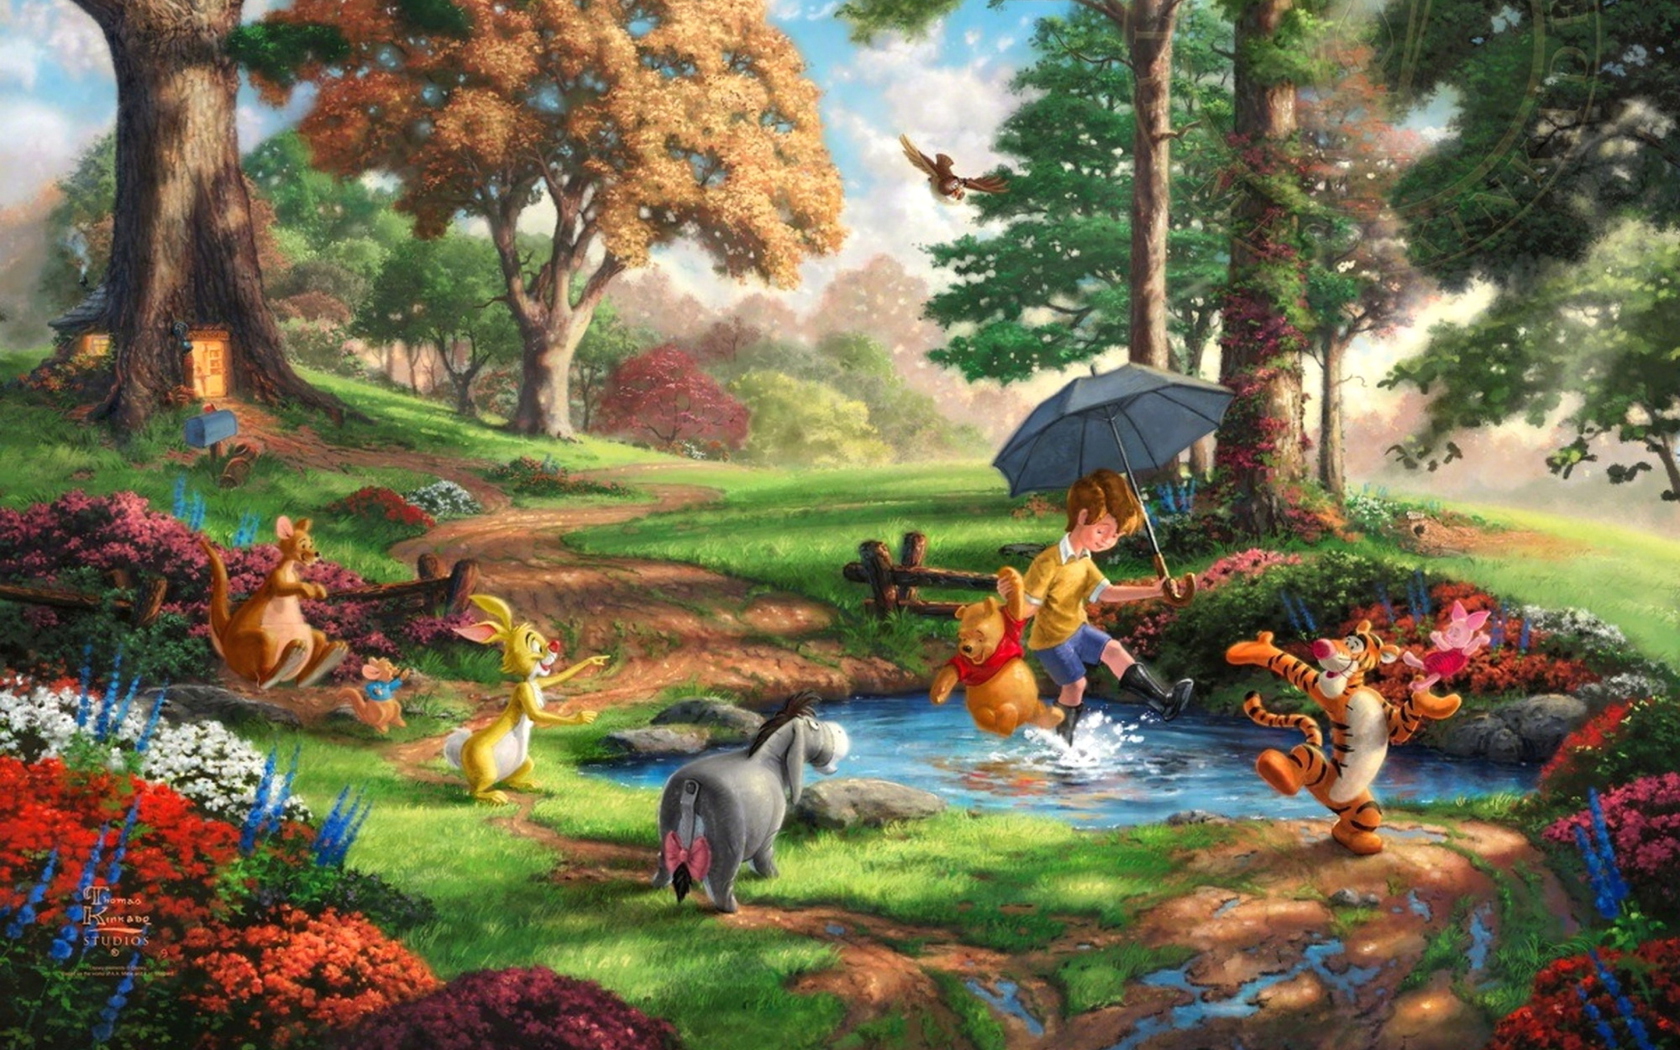 Winnie The Pooh And Friends wallpaper 1680x1050